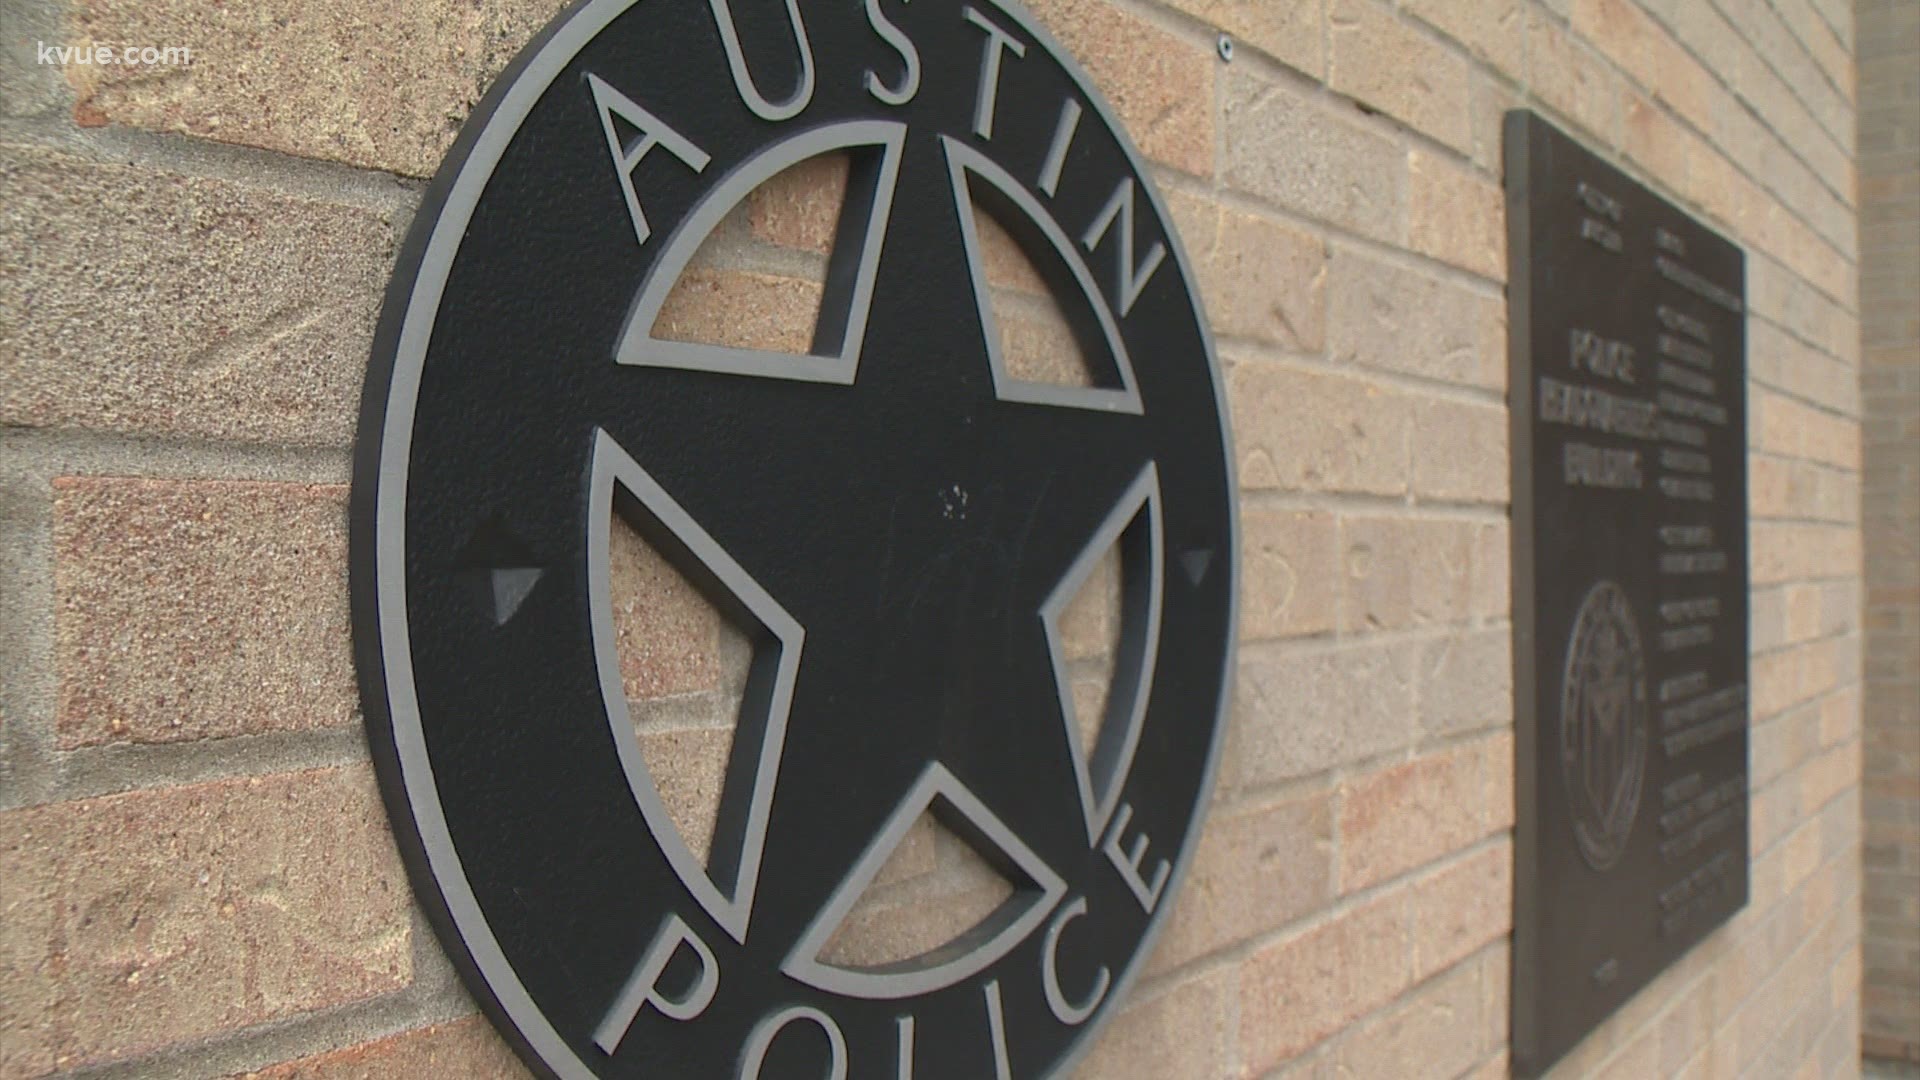 There's now been a renewed call to put Austin's police cadet classes on hold.